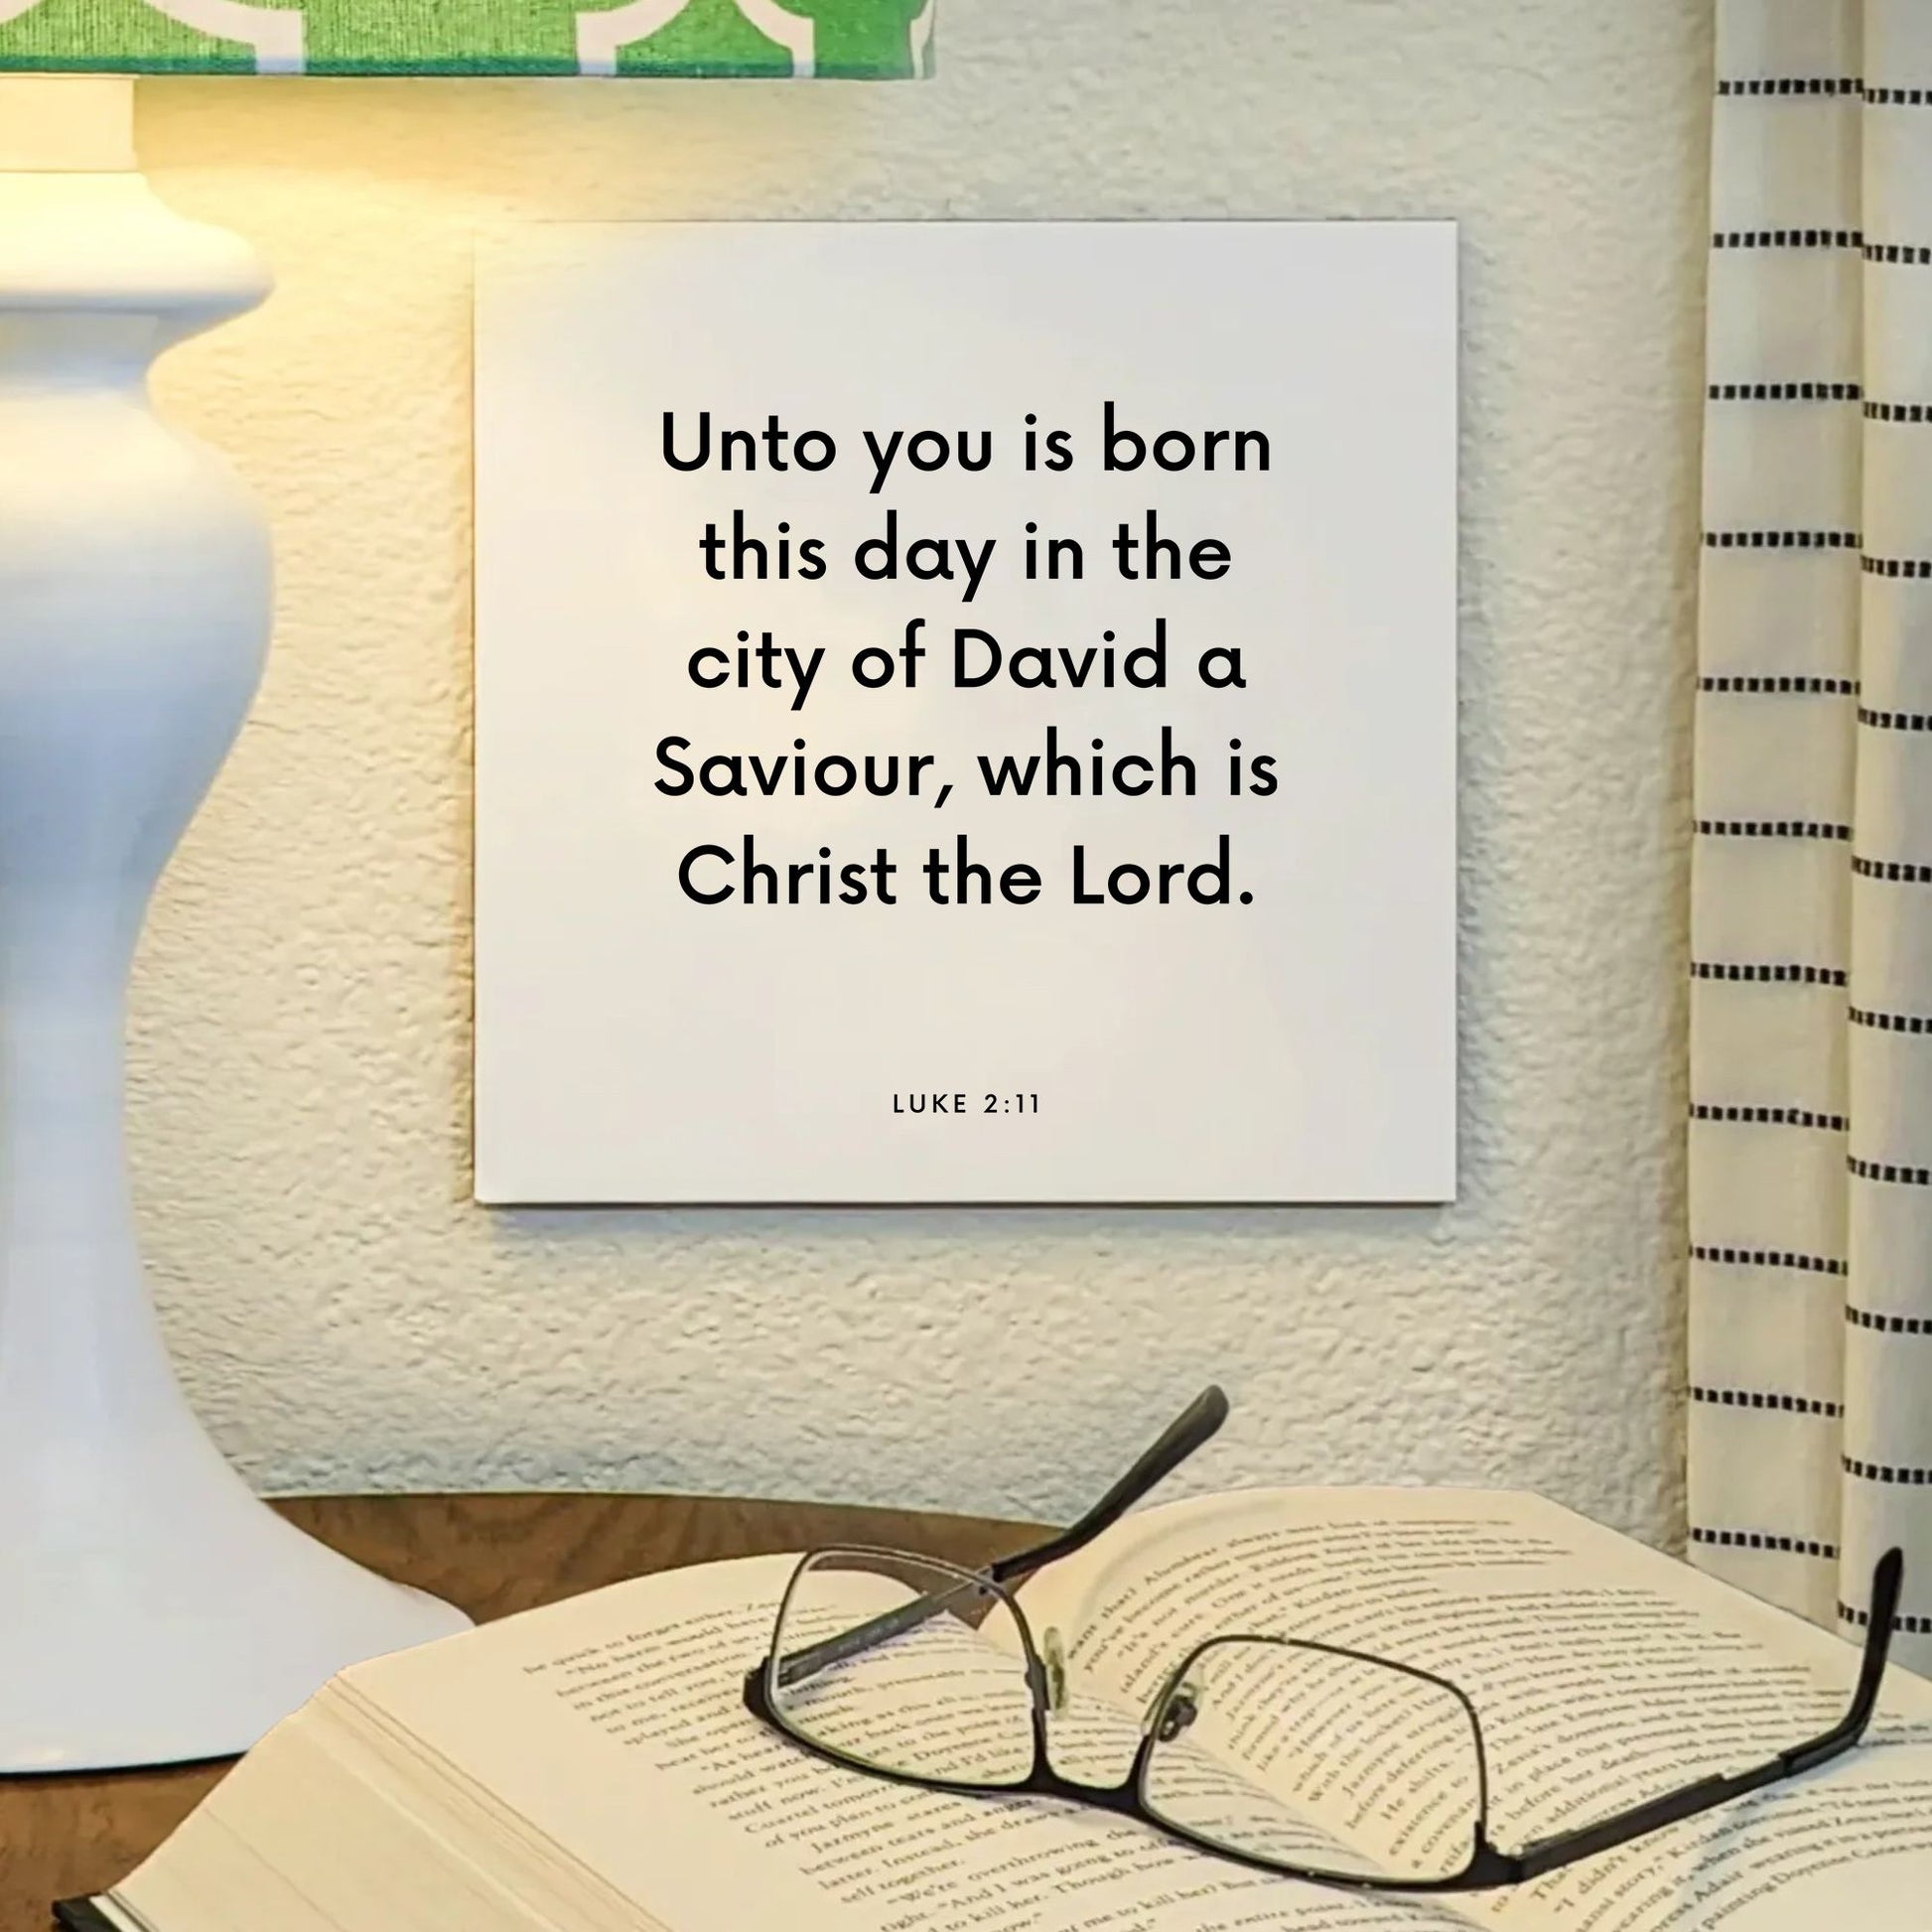 Lamp mouting of the scripture tile for Luke 2:11 - "Unto you is born this day in the city of David a Saviour"